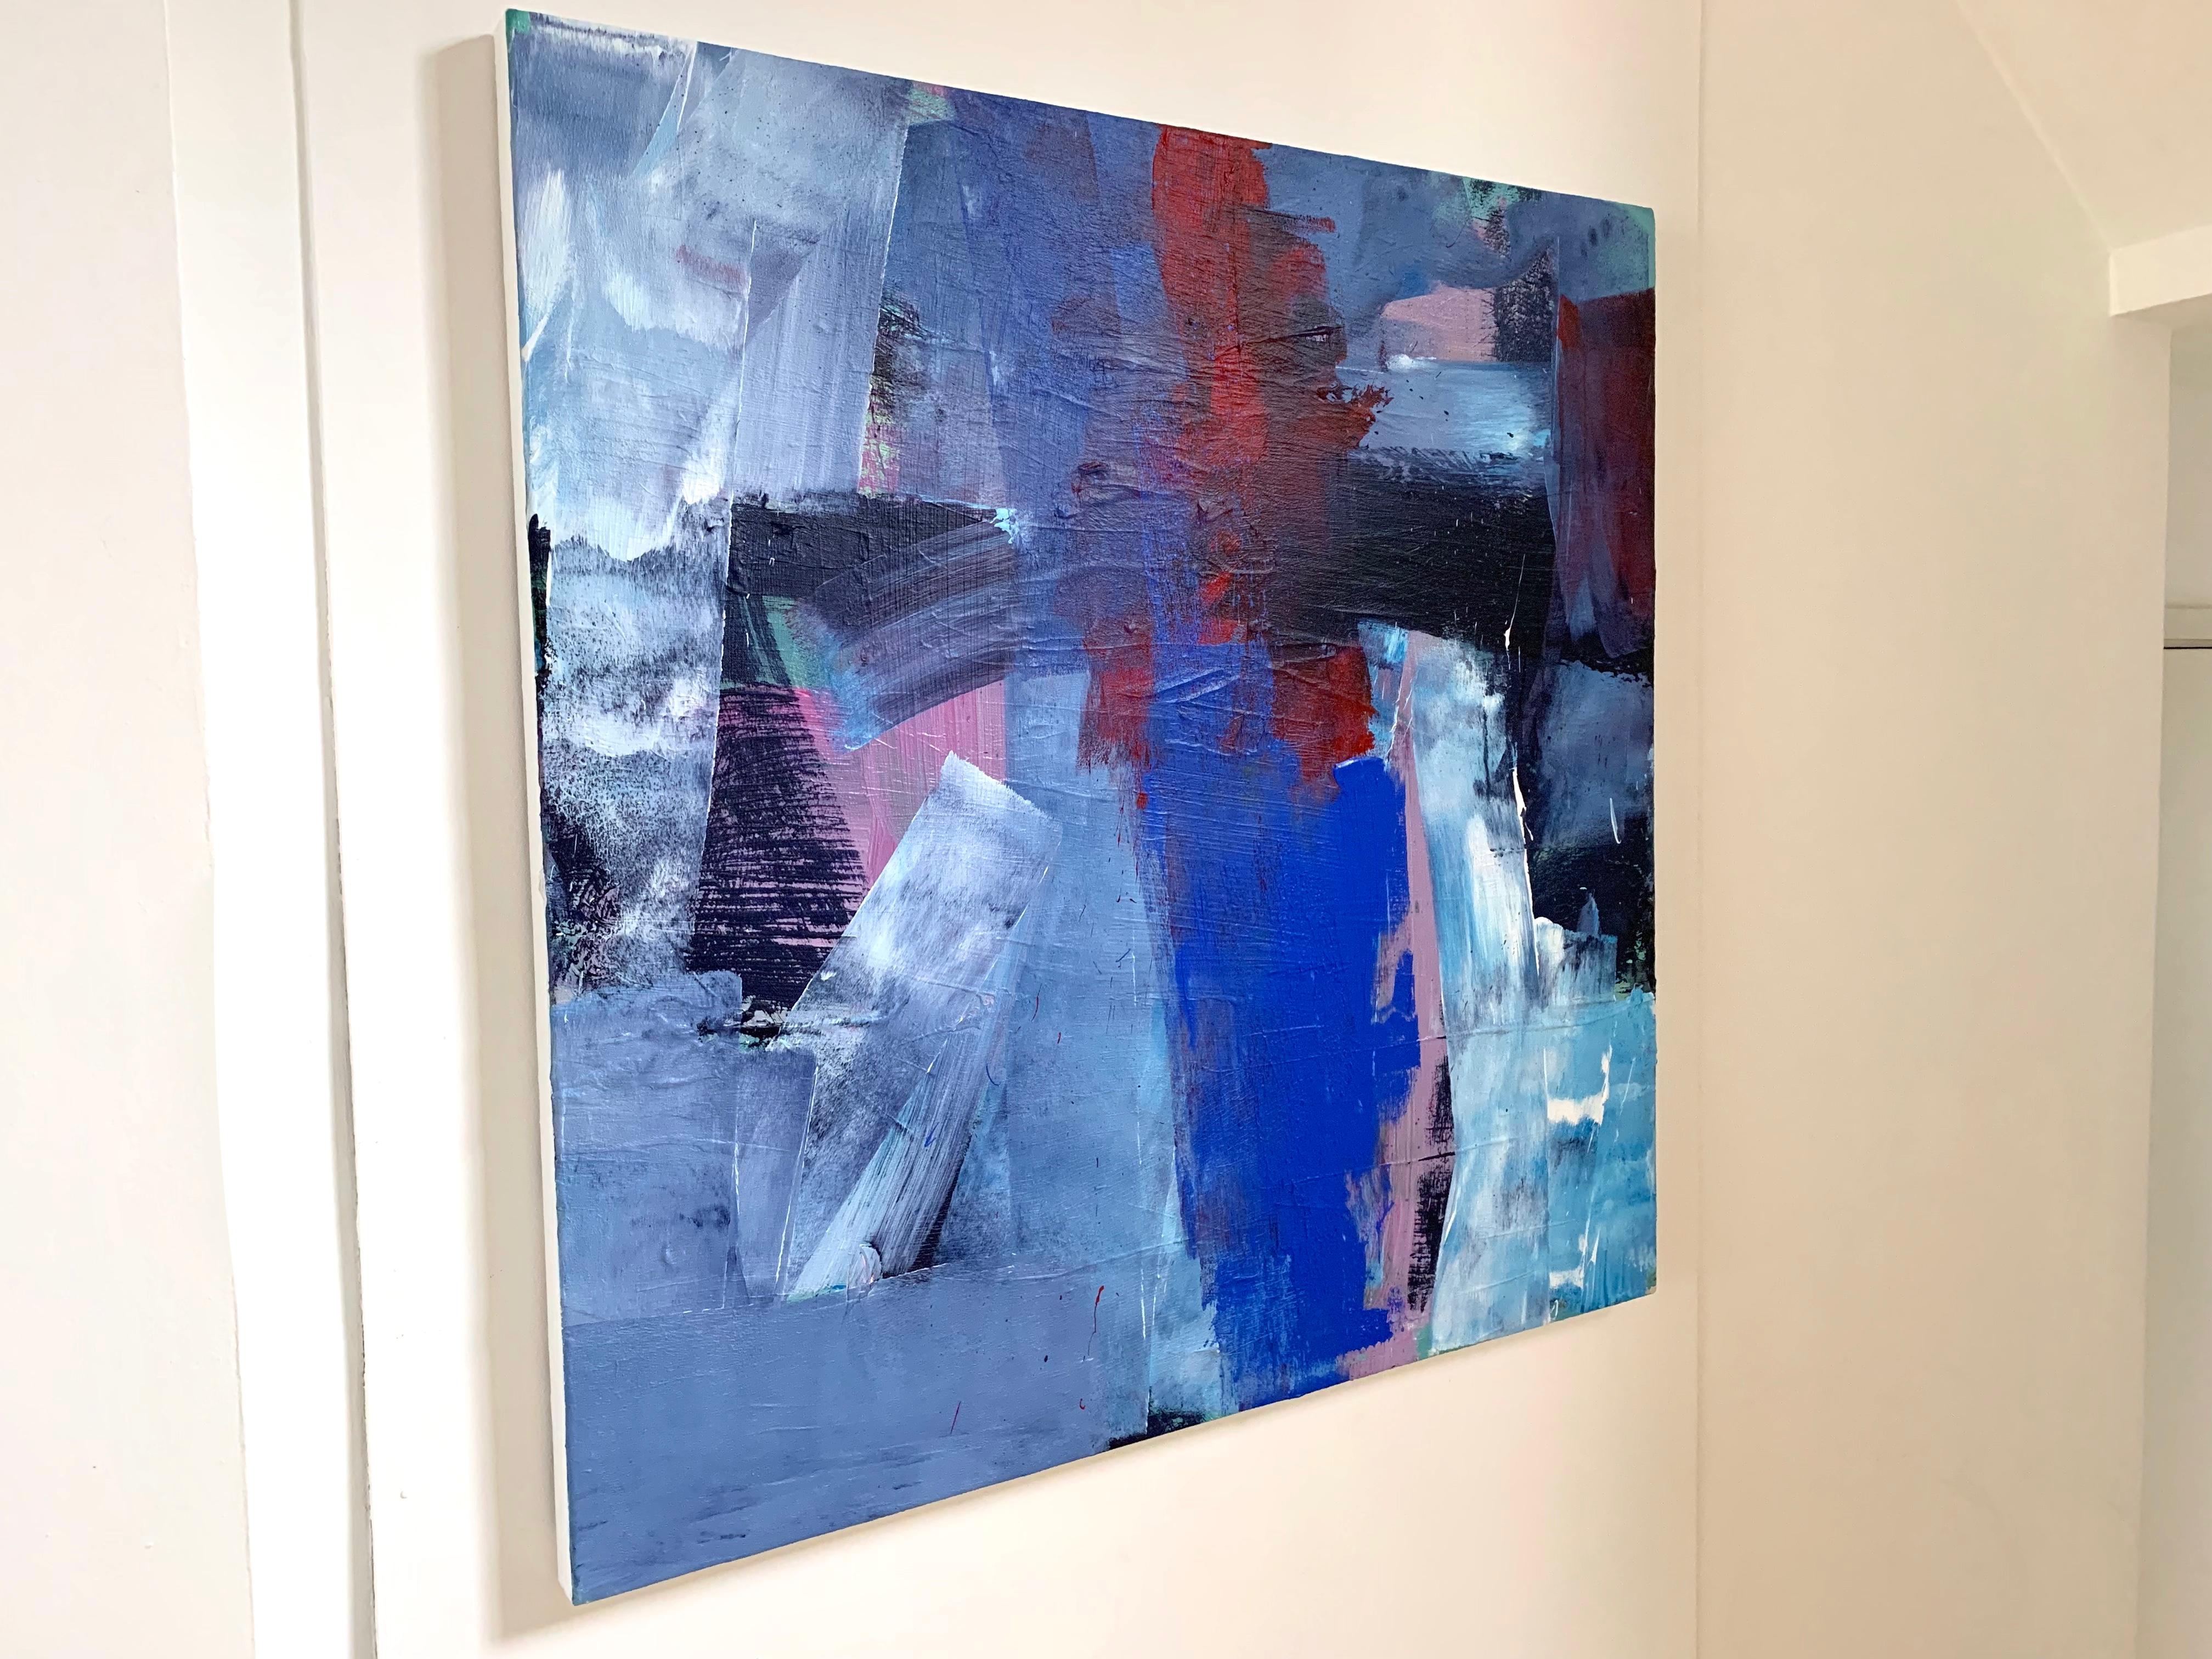 This is one of Deborah’s large, vibrant and energetic works on canvas, painted on the floor and wall, using her whole body.  Deborah Lanyon's large abstract paintings come from a generation of artists, mostly men, including John Hoyland, Frank